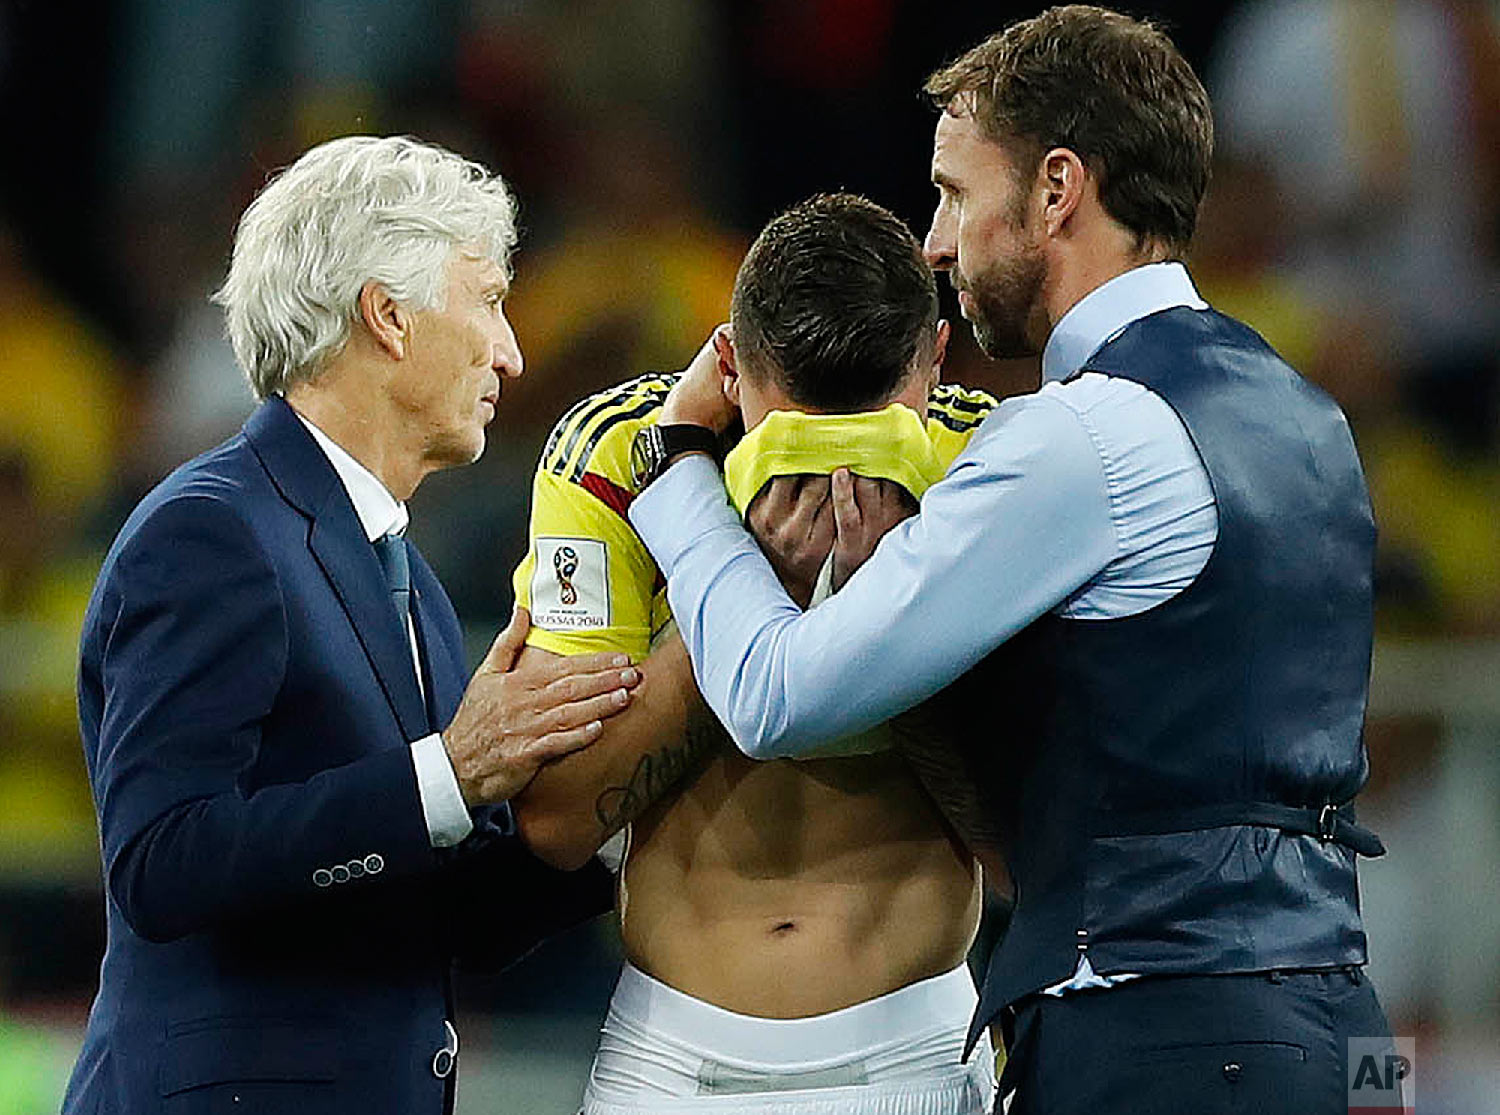  Colombia head coach Jose Pekerman, left, and England head coach Gareth Southgate, right, comfort Colombia's Mateus Uribe after the round of 16 match between Colombia and England at the 2018 soccer World Cup in the Spartak Stadium, in Moscow, Russia 